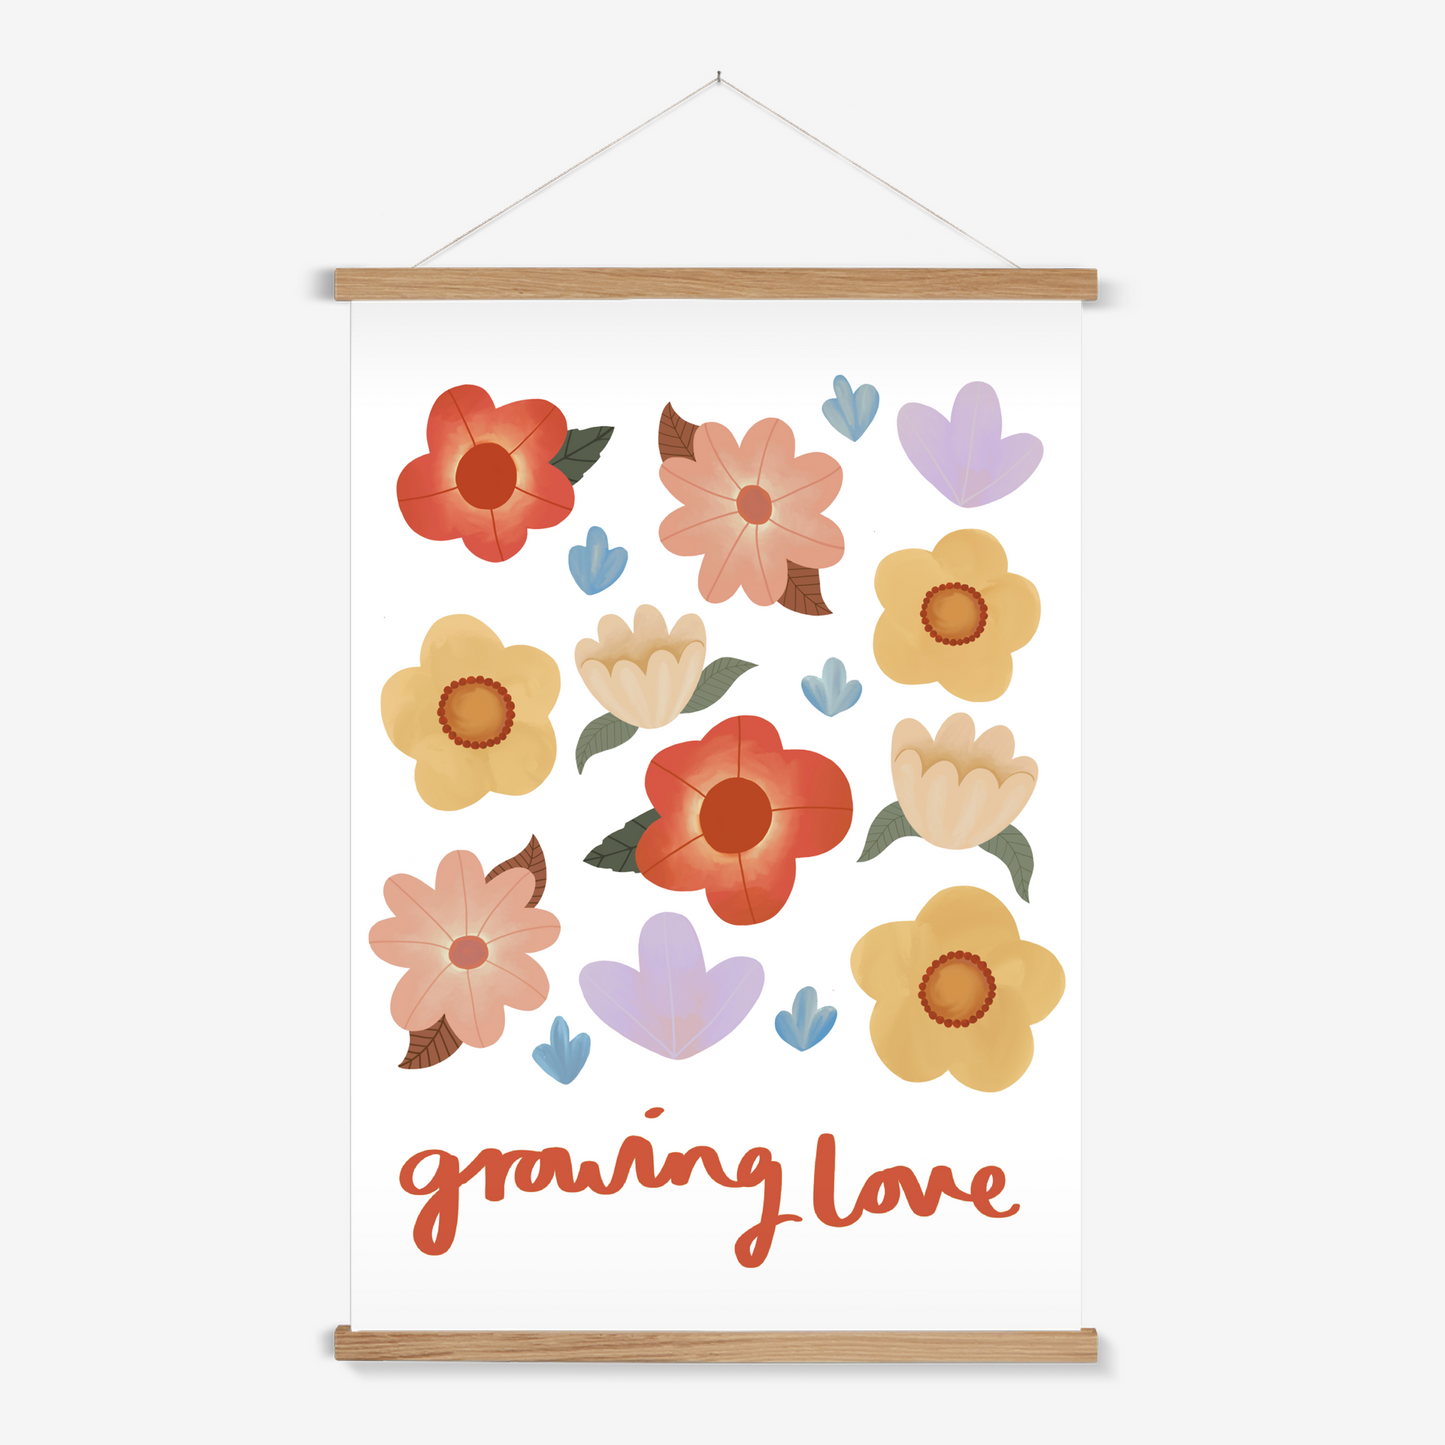 Growing love / Print with Hanger